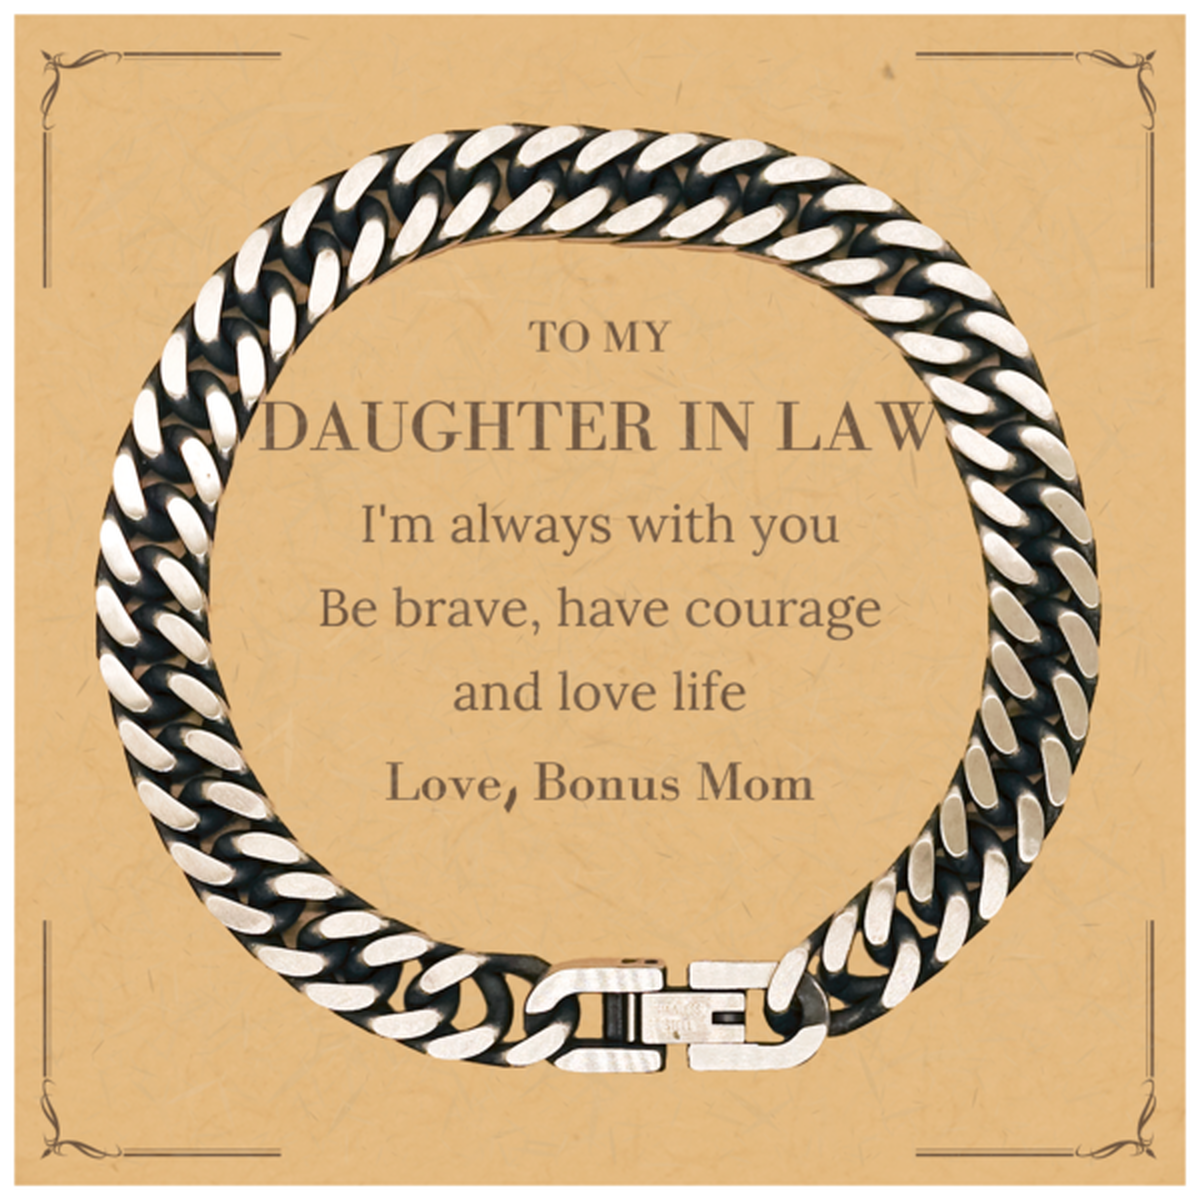 To My Daughter In Law Gifts from Bonus Mom, Unique Cuban Link Chain Bracelet Inspirational Christmas Birthday Graduation Gifts for Daughter In Law I'm always with you. Be brave, have courage and love life. Love, Bonus Mom